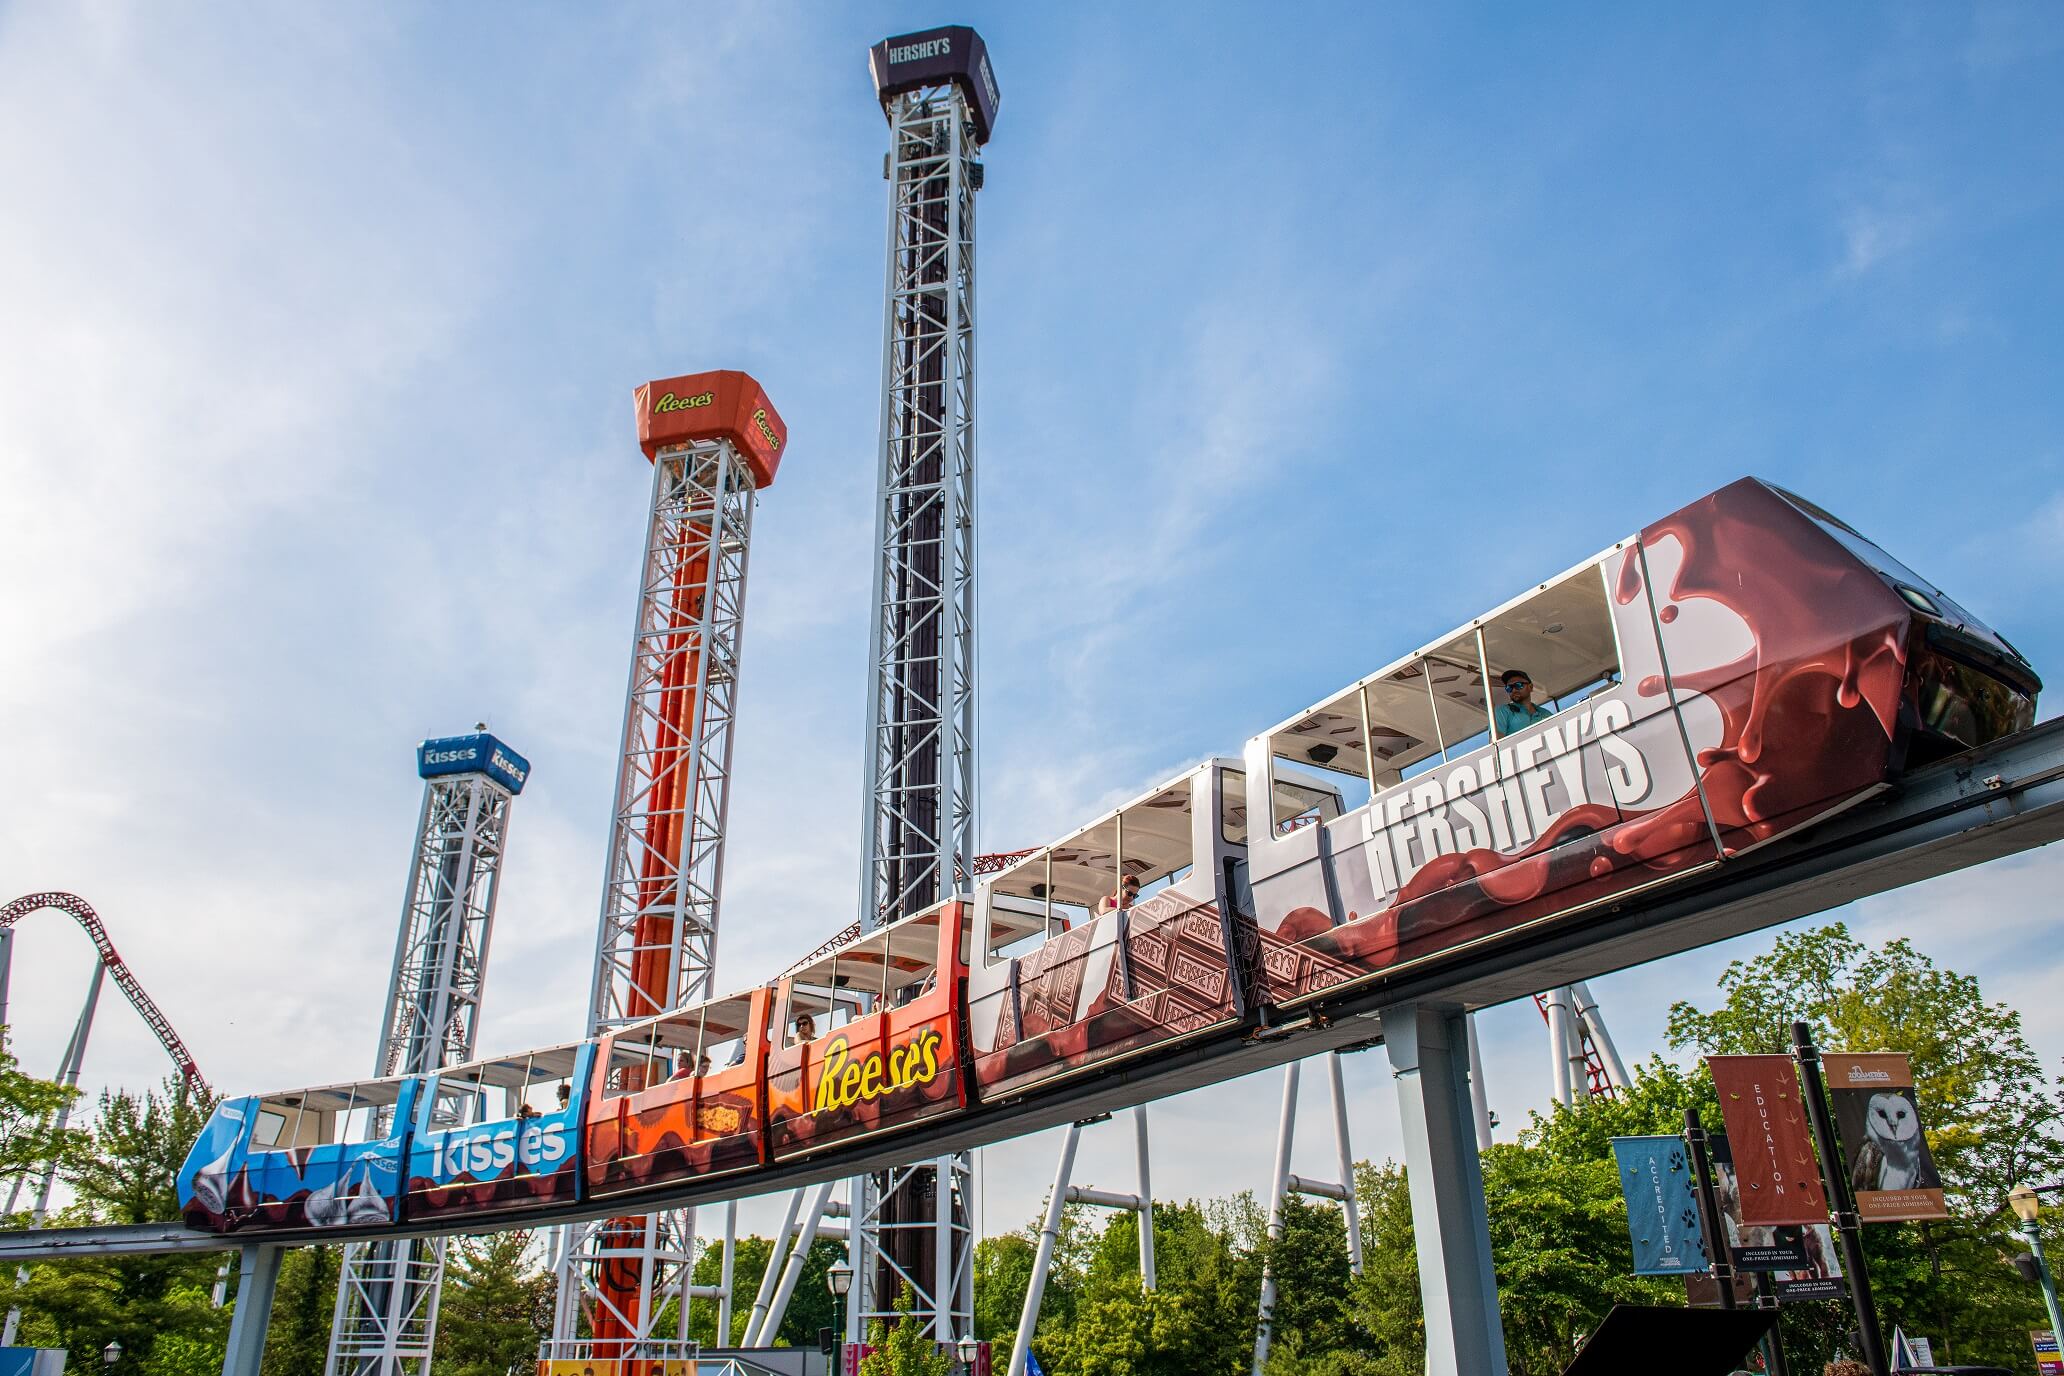 Hershey Park Rides and Attractions